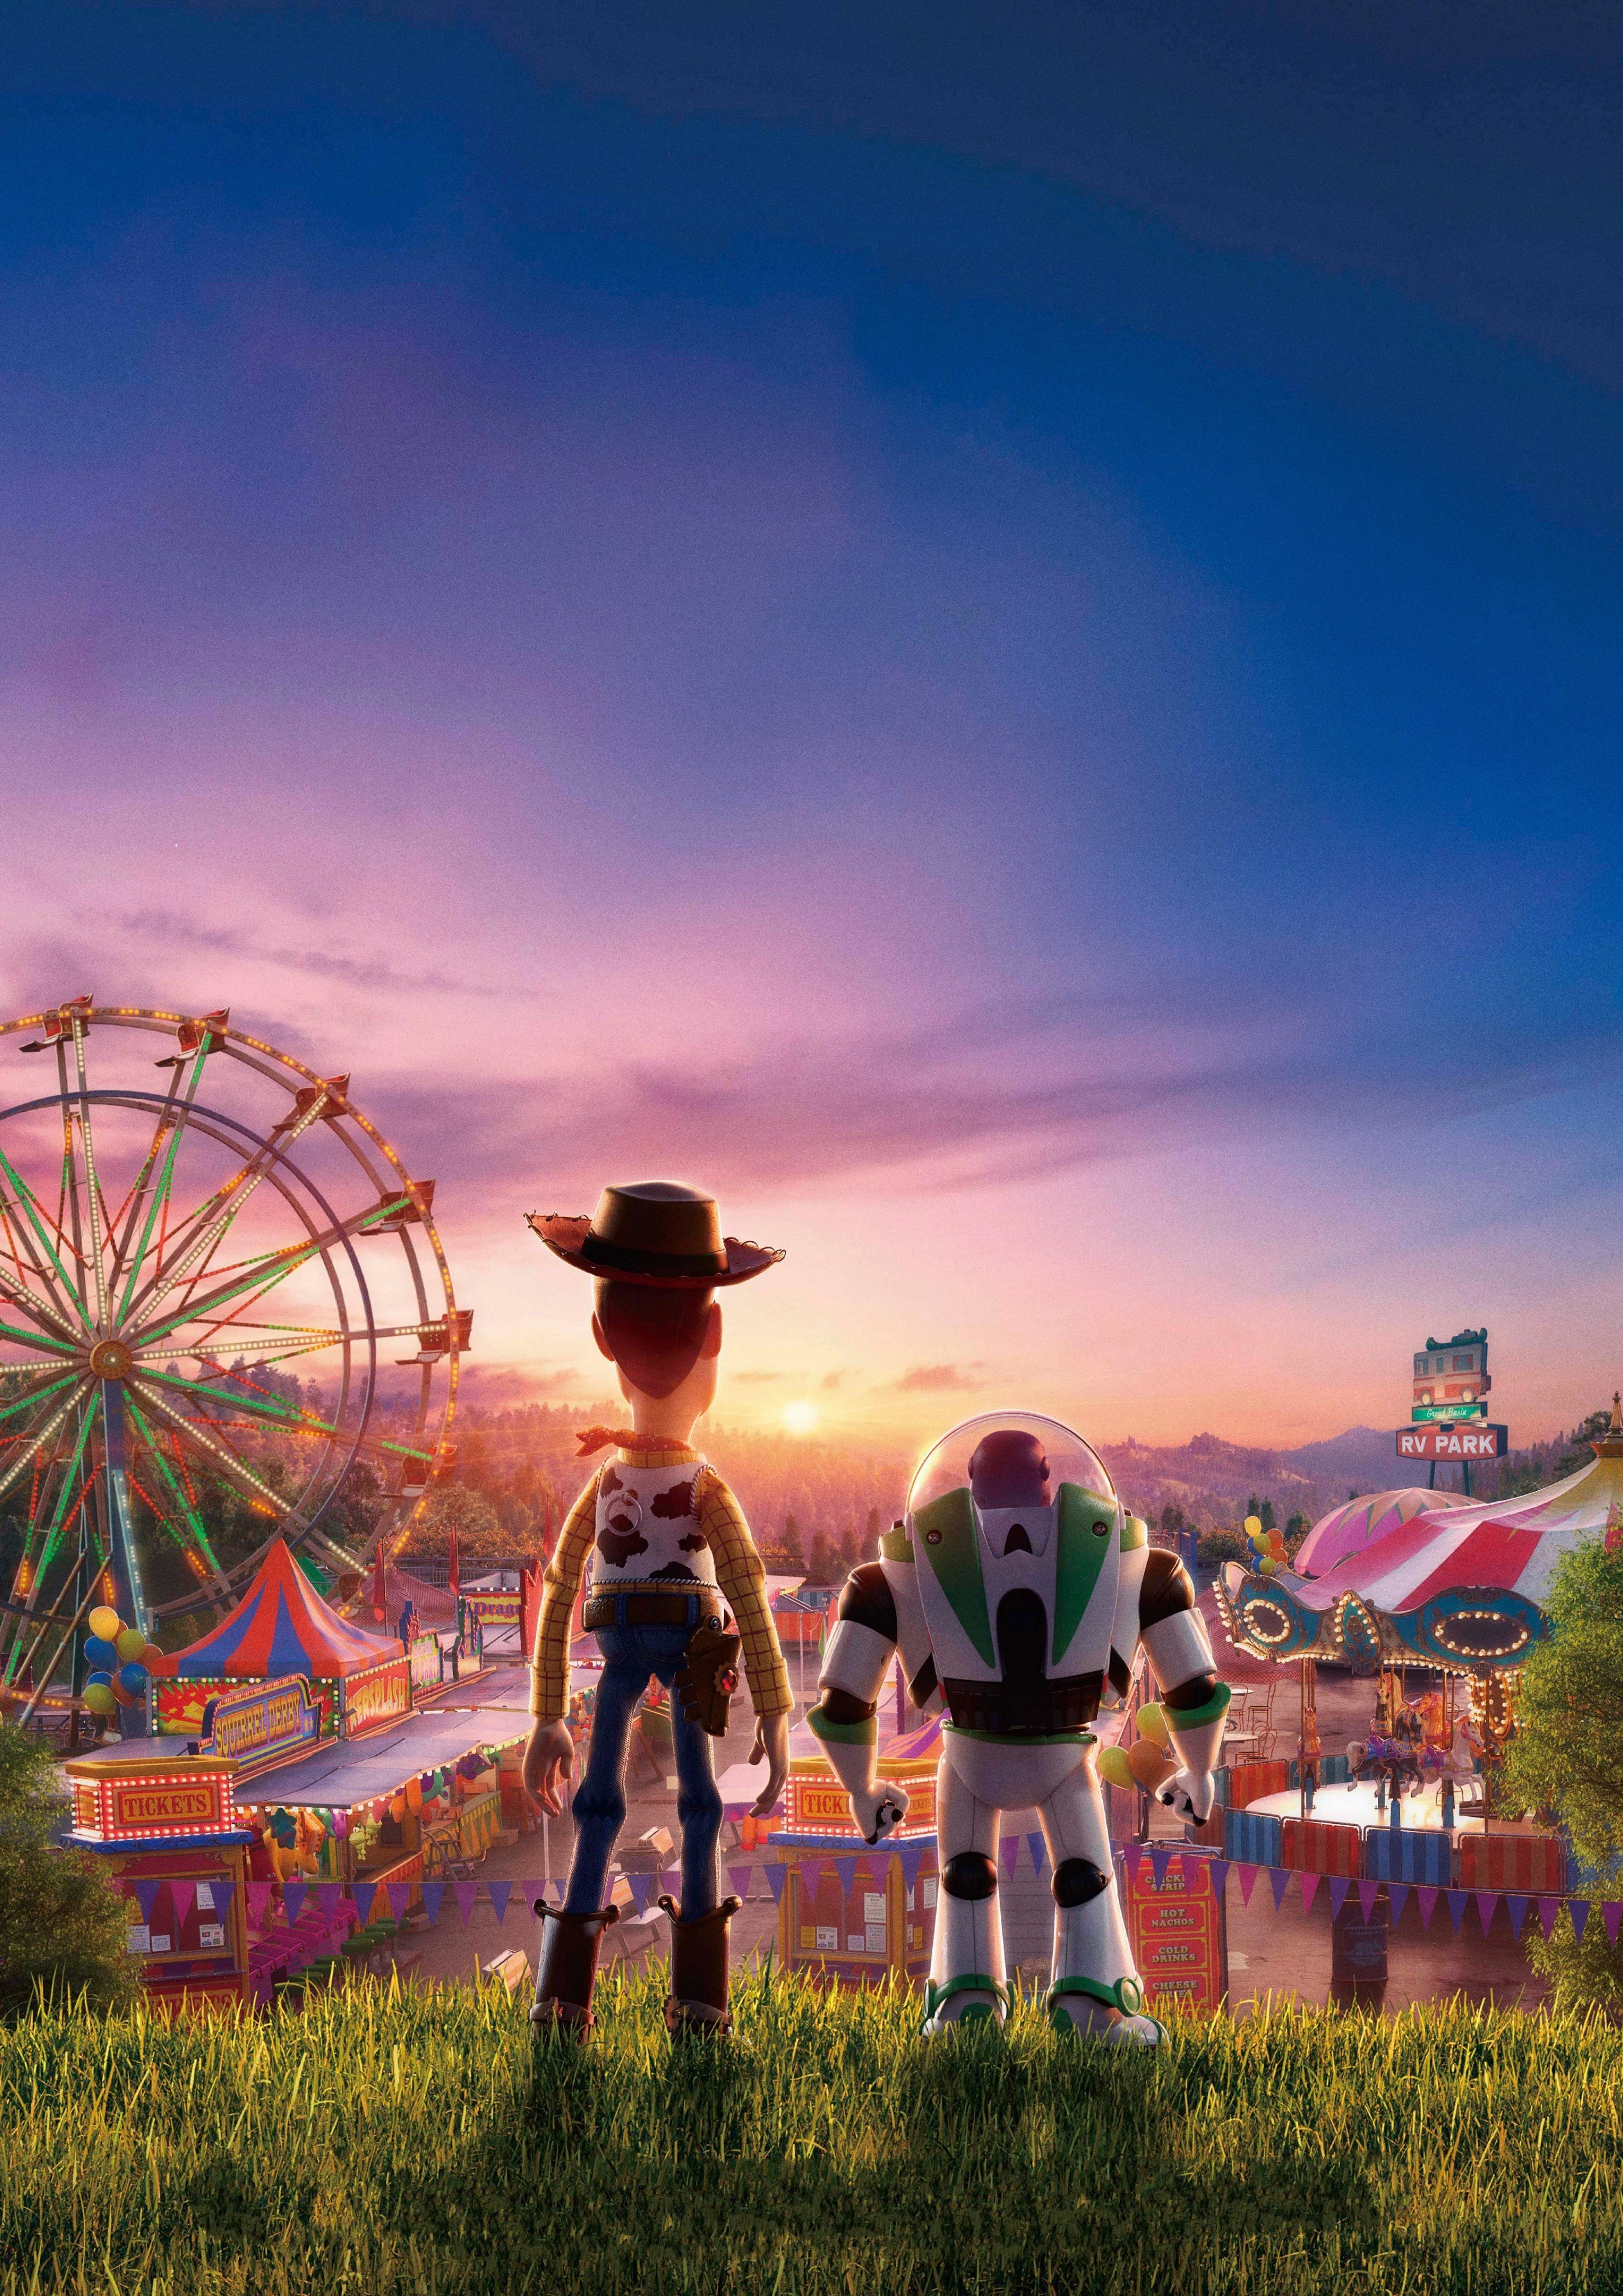 Toy Story 4 Movie Wallpaper, HD Movies 4K Wallpapers, Images, Photos